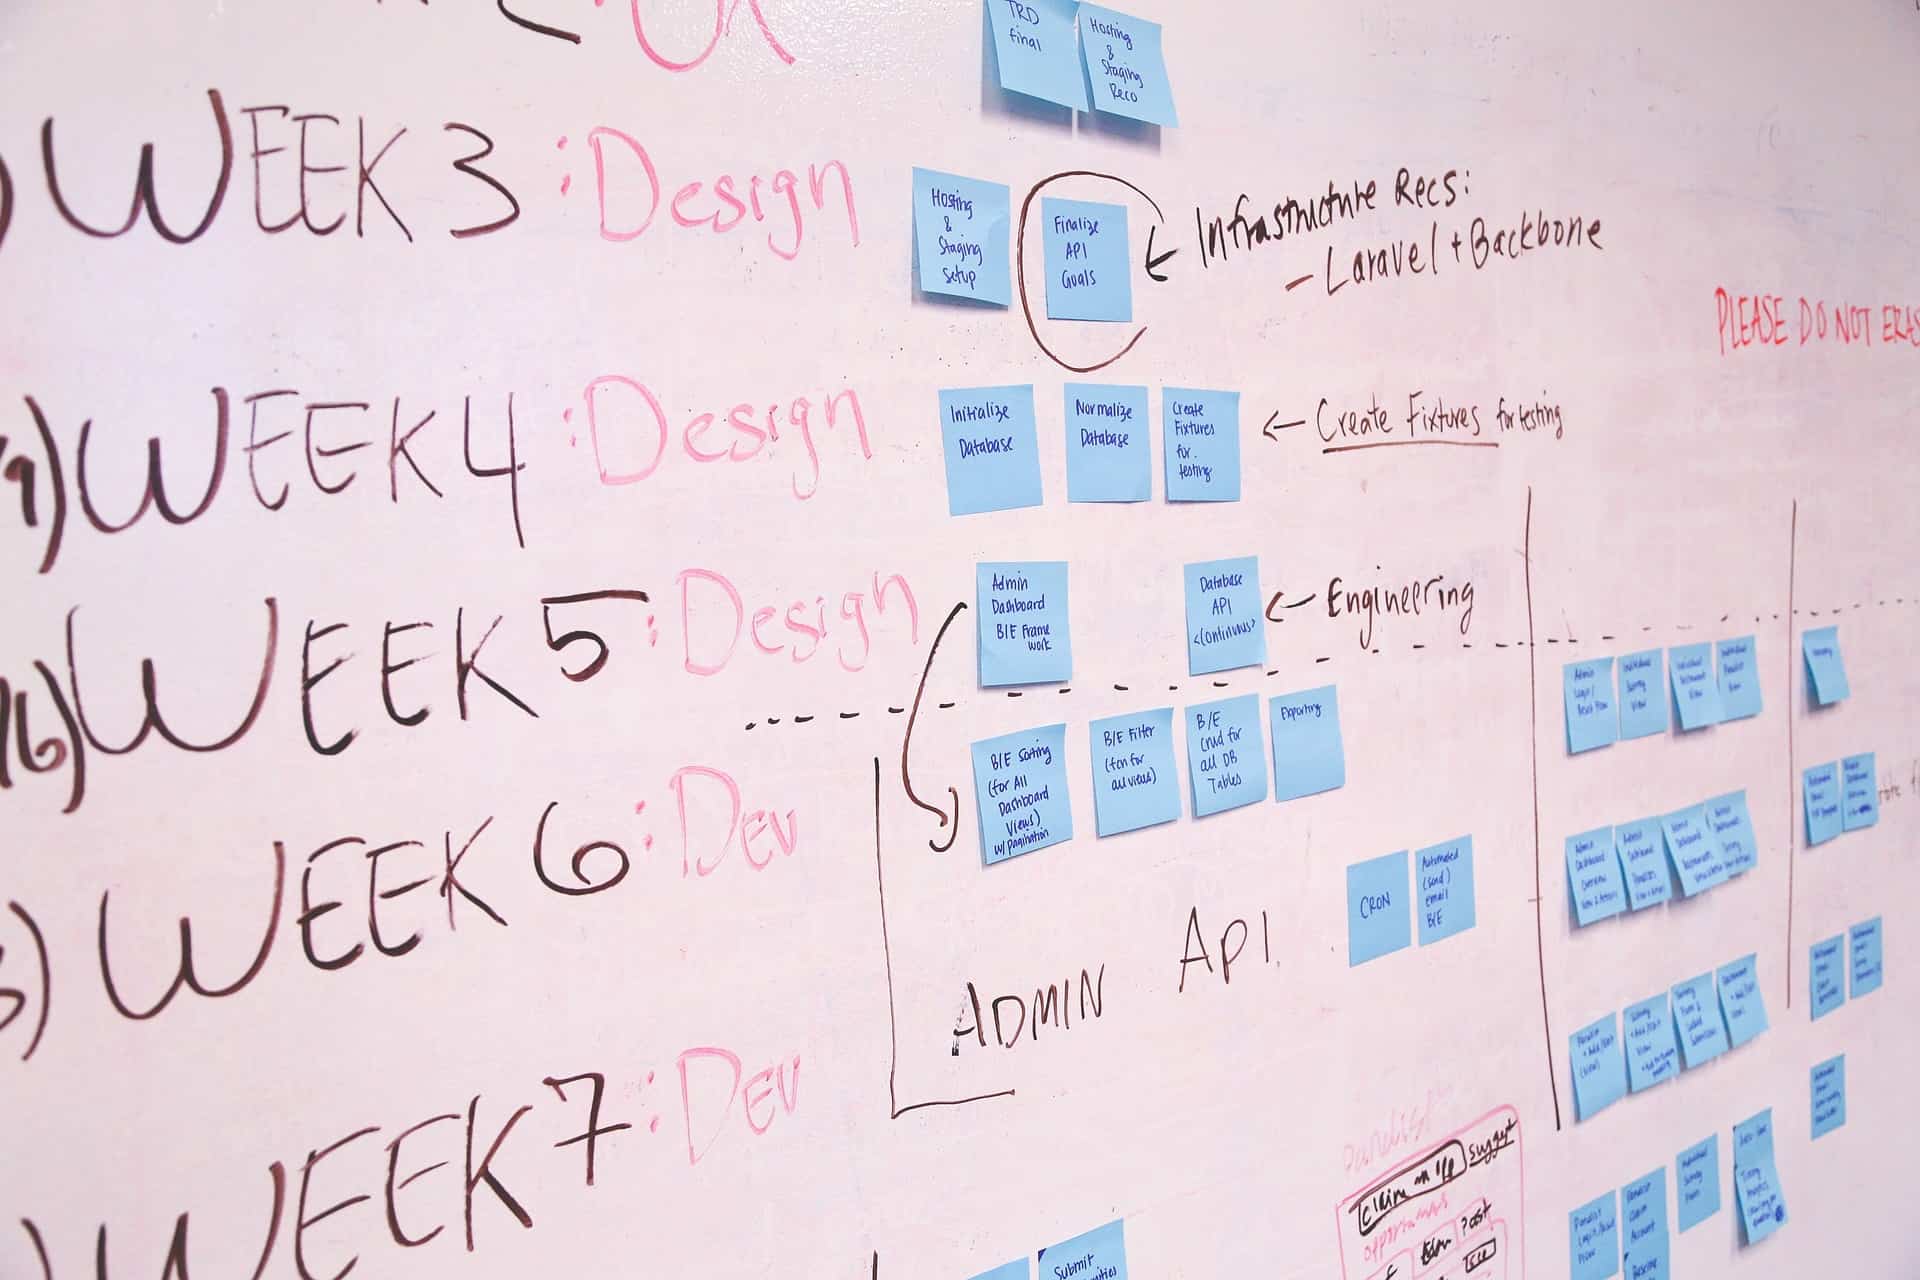 Product Roadmap 101 for Product Managers